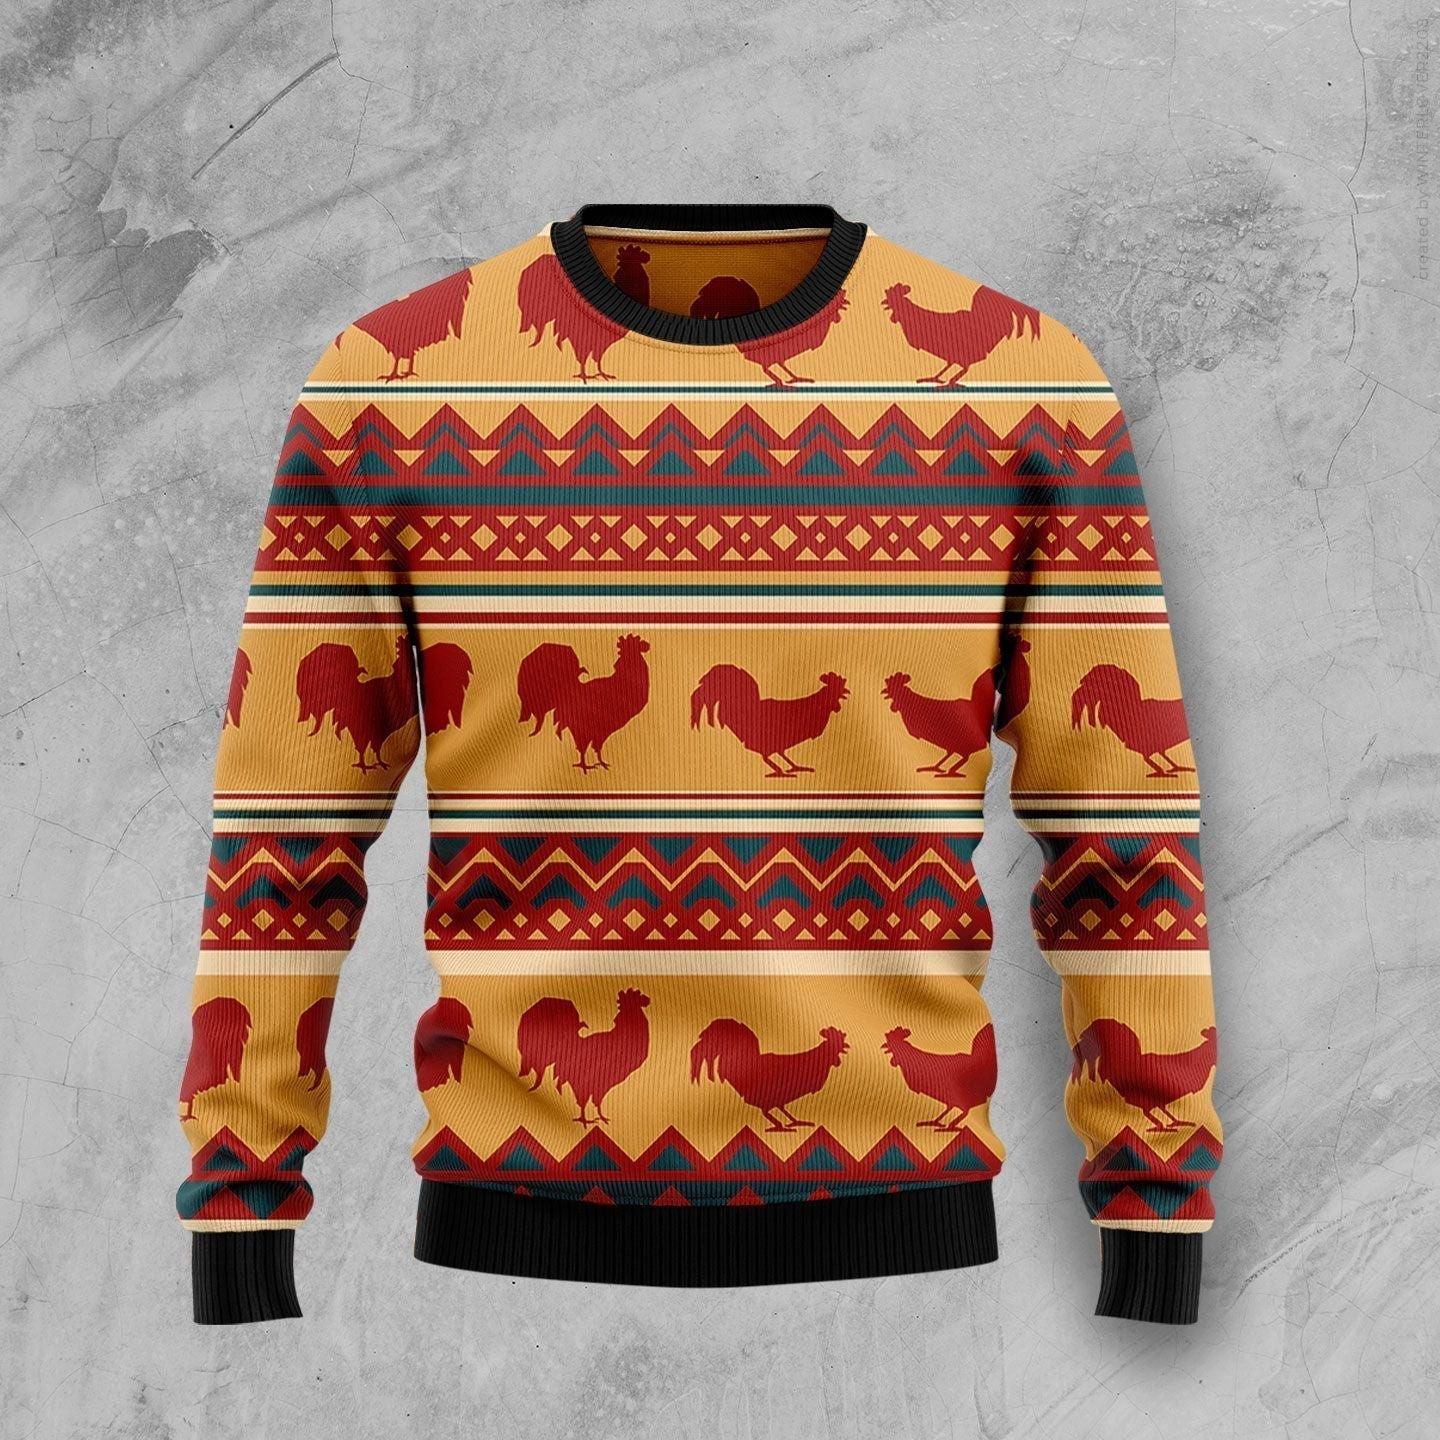 Amazing Chicken Ugly Christmas Sweater Ugly Sweater For Men Women, Holiday Sweater